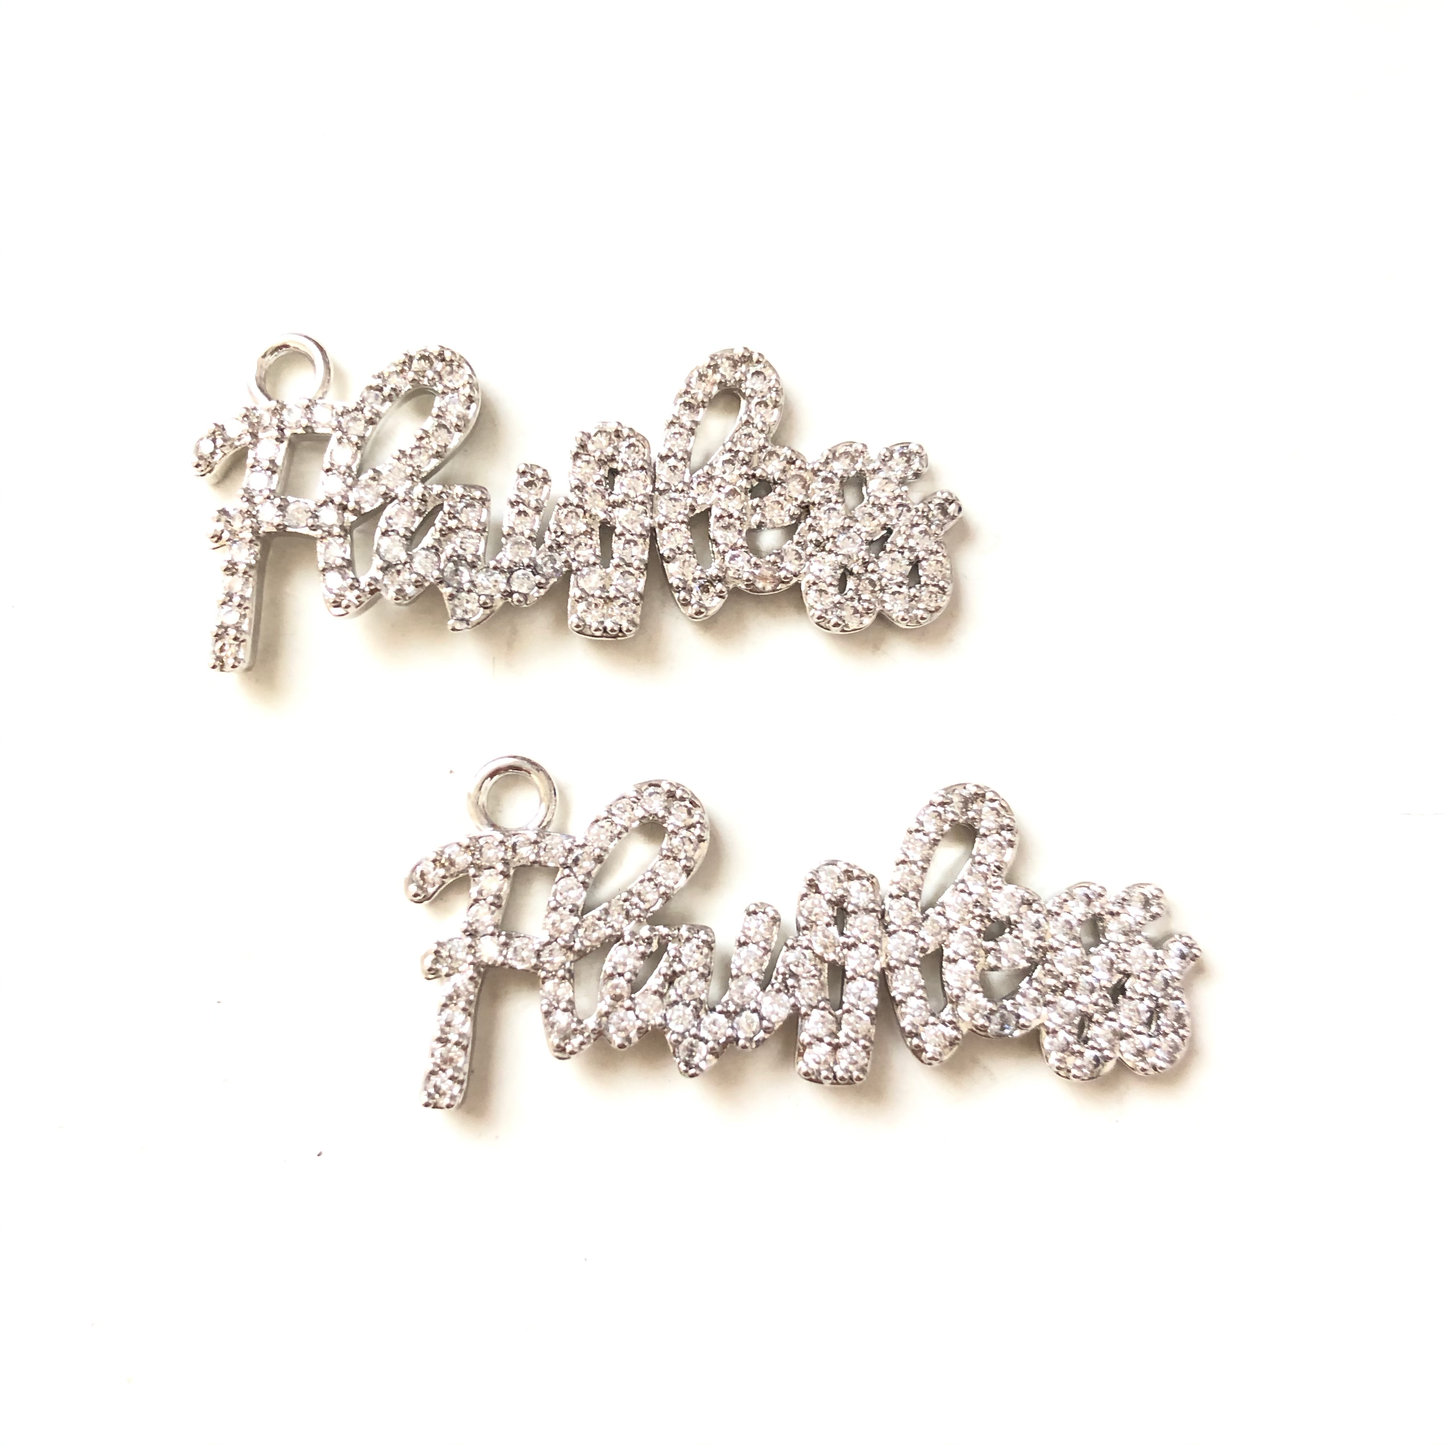 10pcs/lot 40*17.6mm CZ Paved Flawless Charms Silver CZ Paved Charms Words & Quotes Charms Beads Beyond